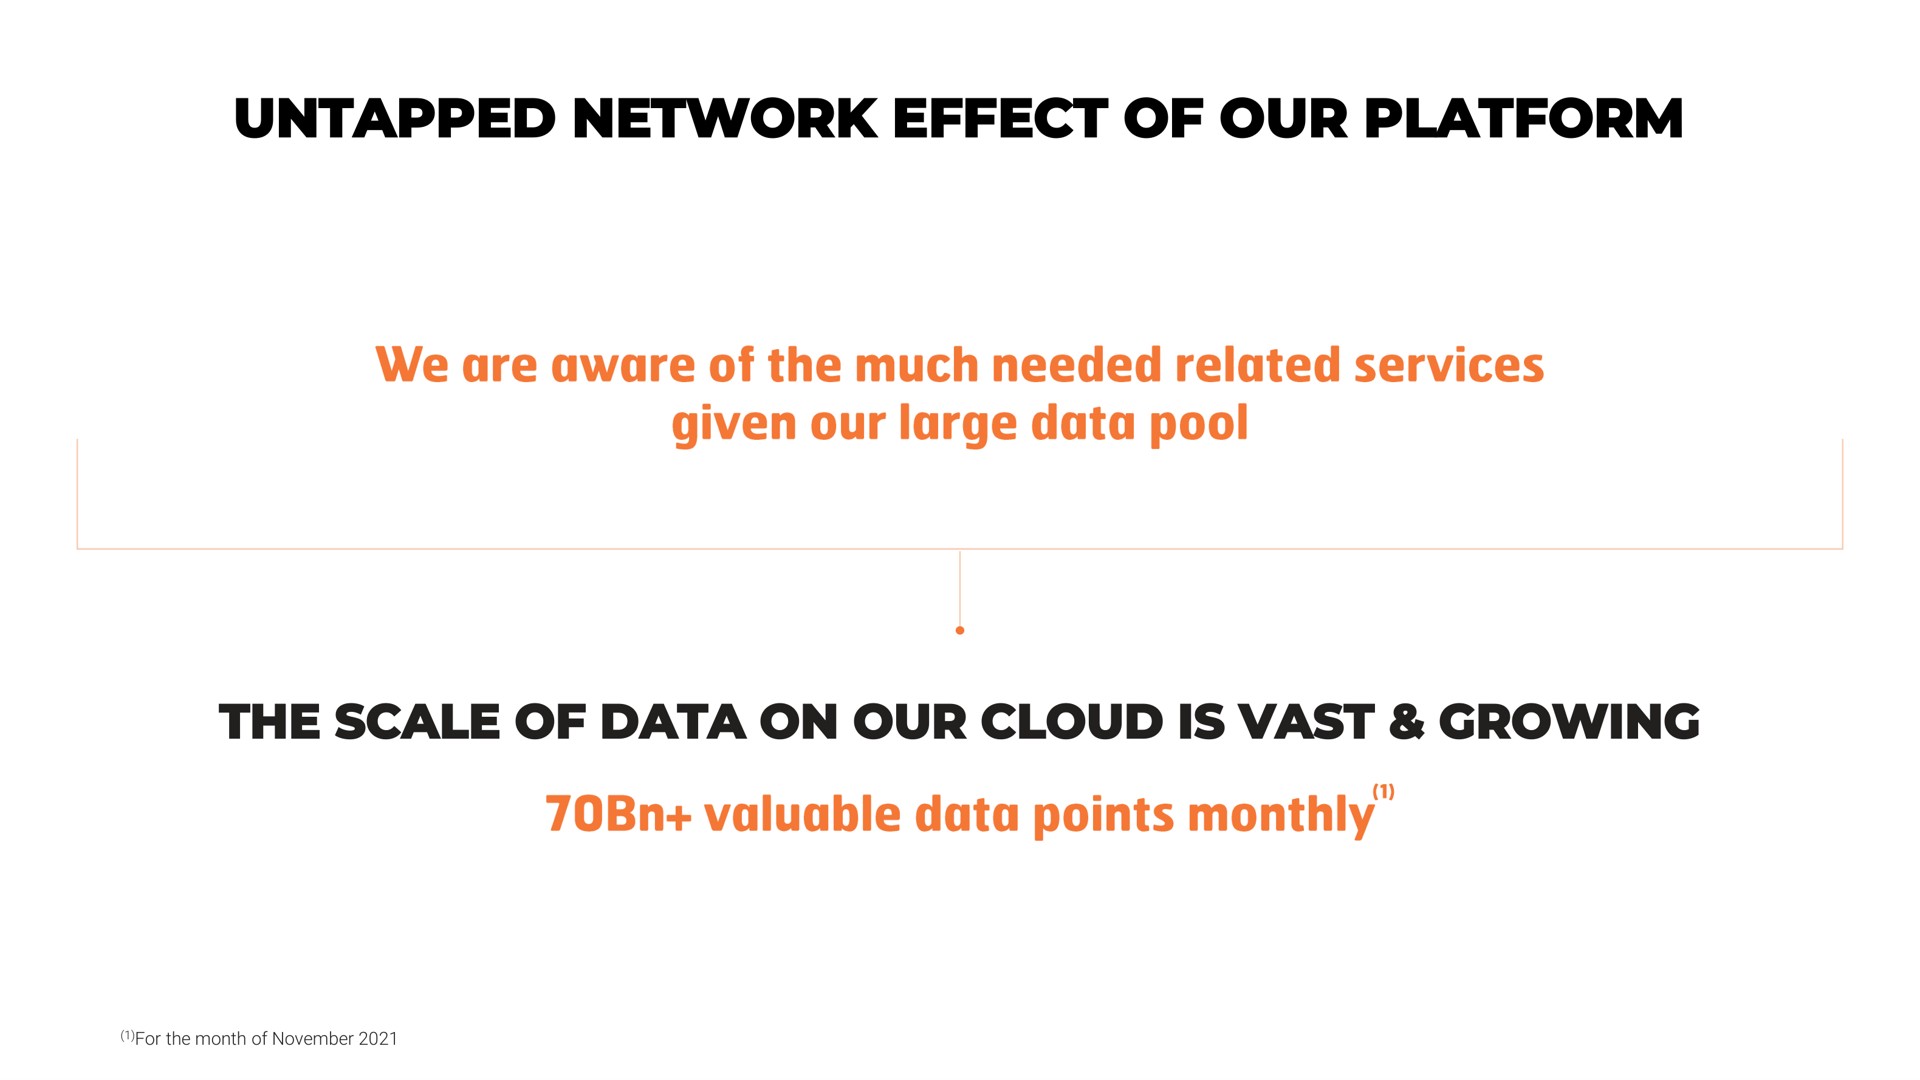 untapped network effect of our platform the scale of data on our cloud is vast growing given large pool valuable points monthly | Karooooo